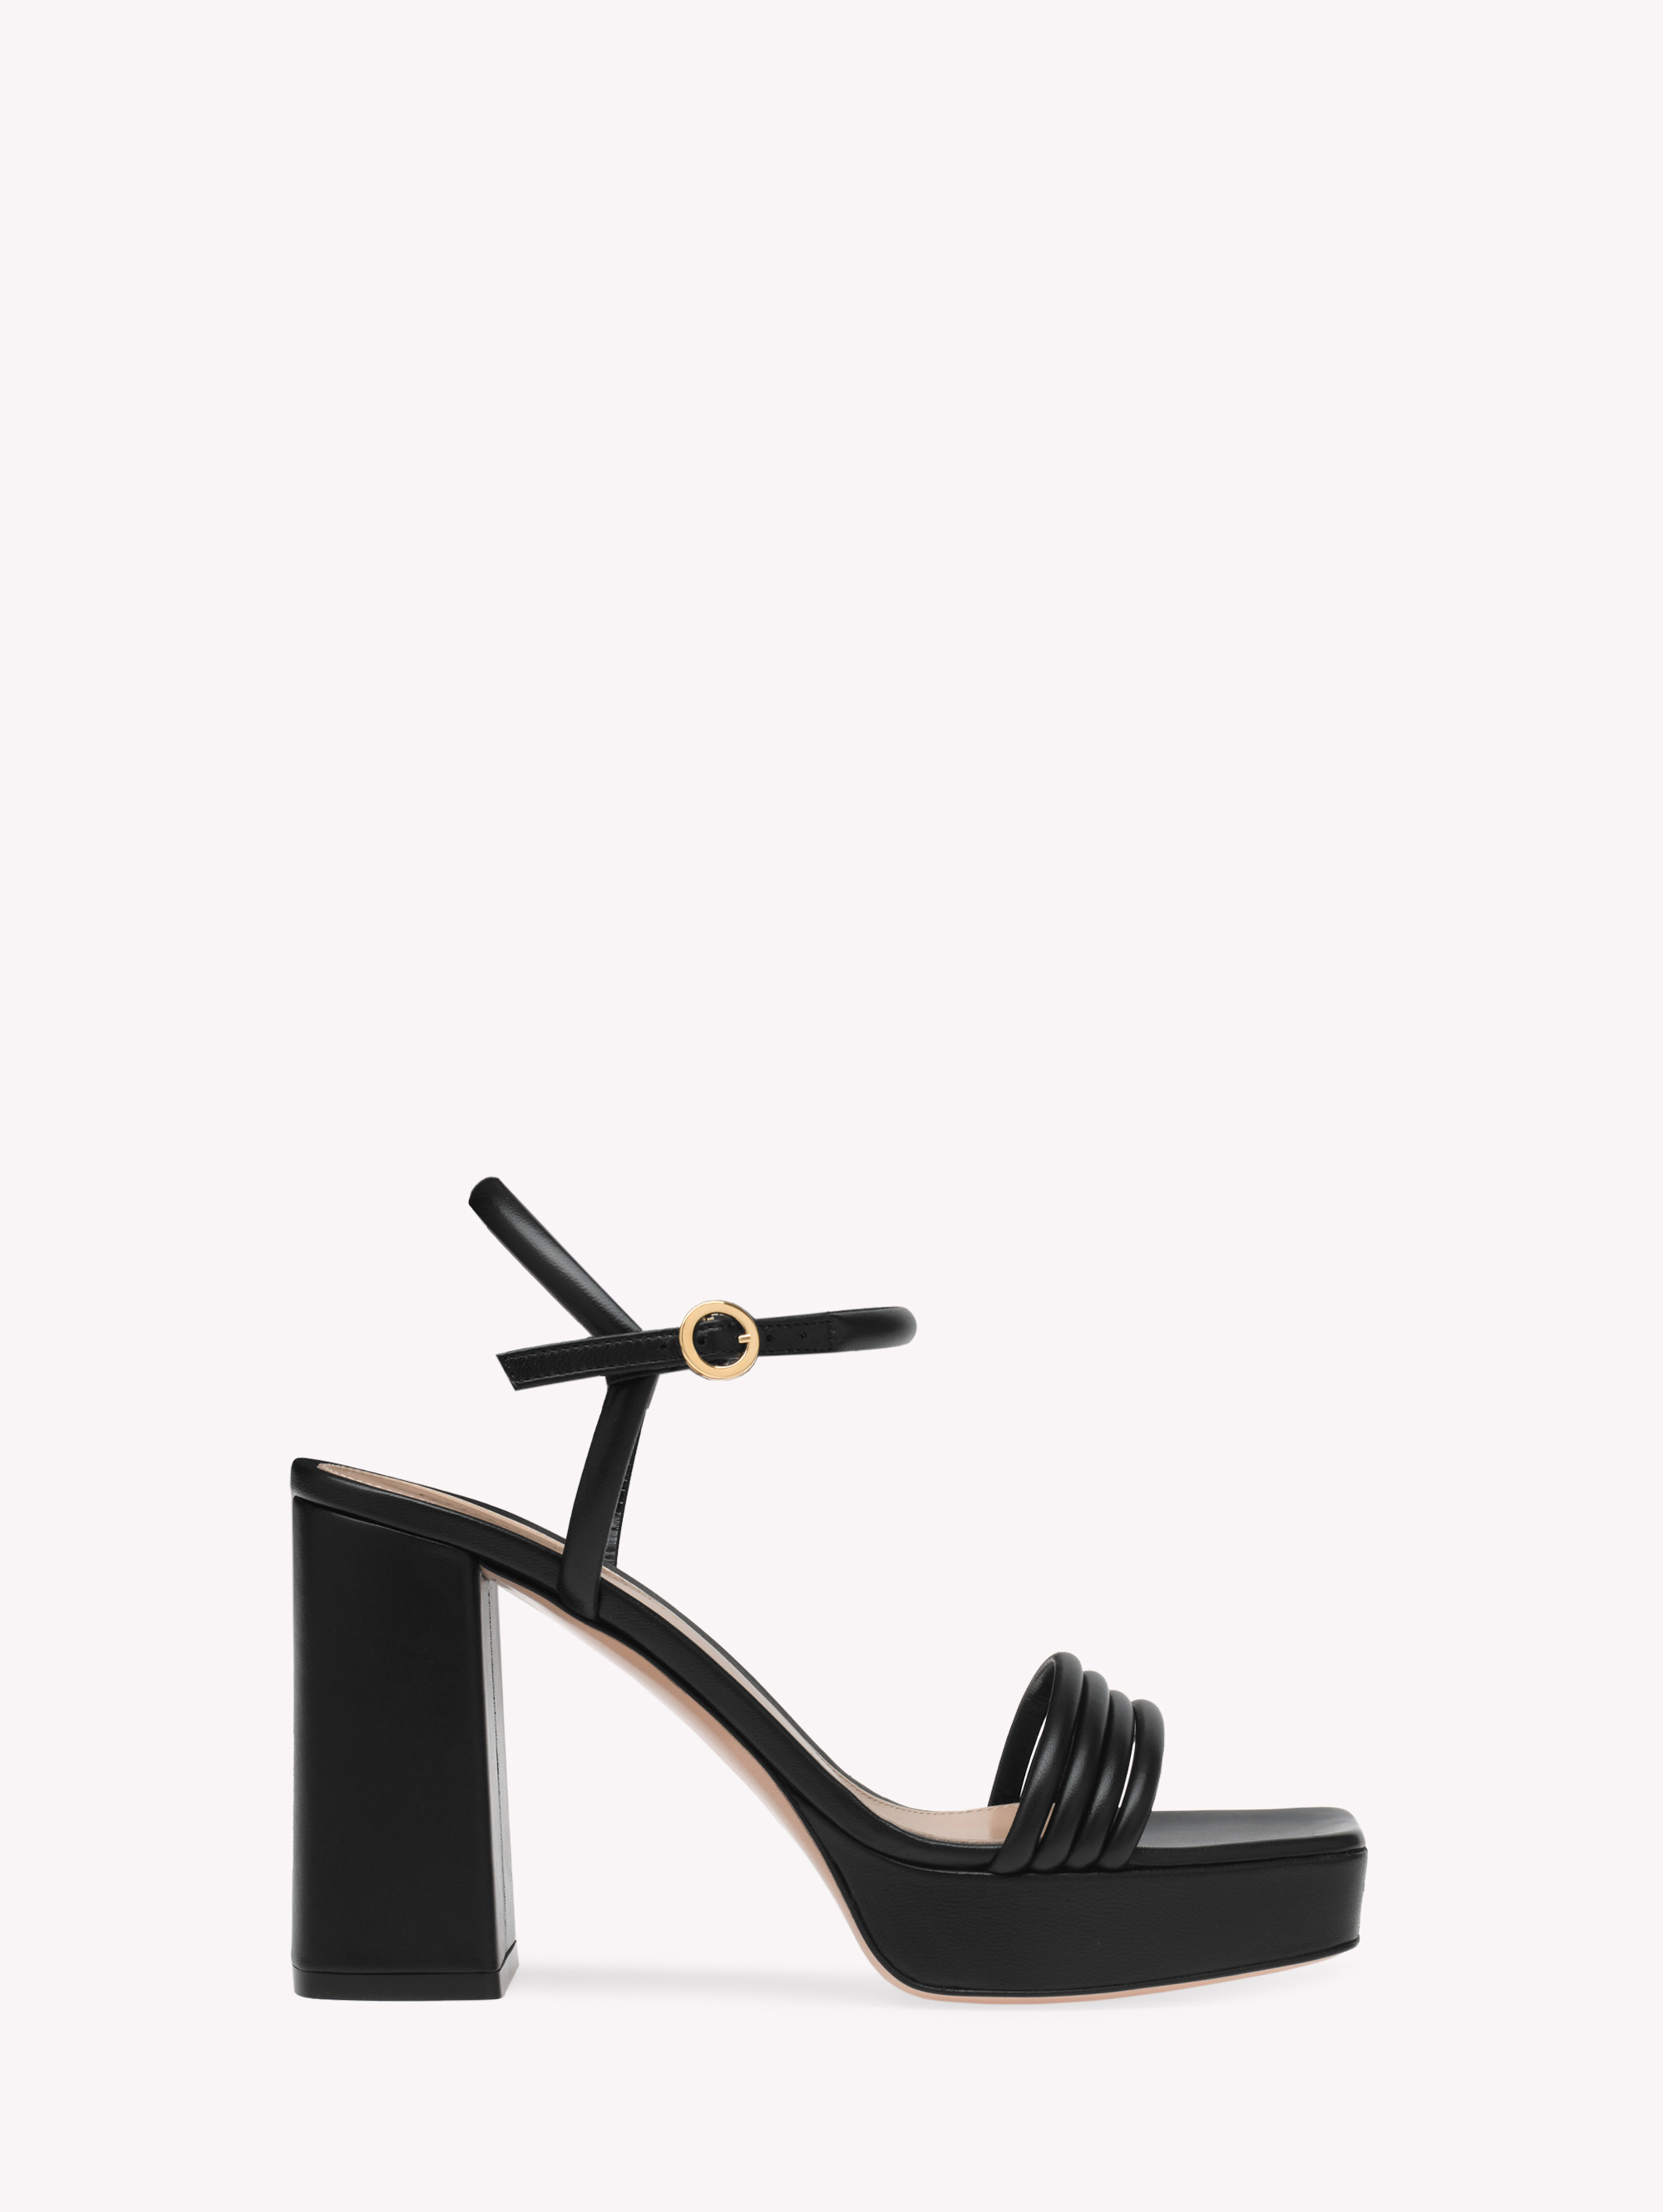 Buy LENA for AED 2940.00 | Gianvito Rossi Global